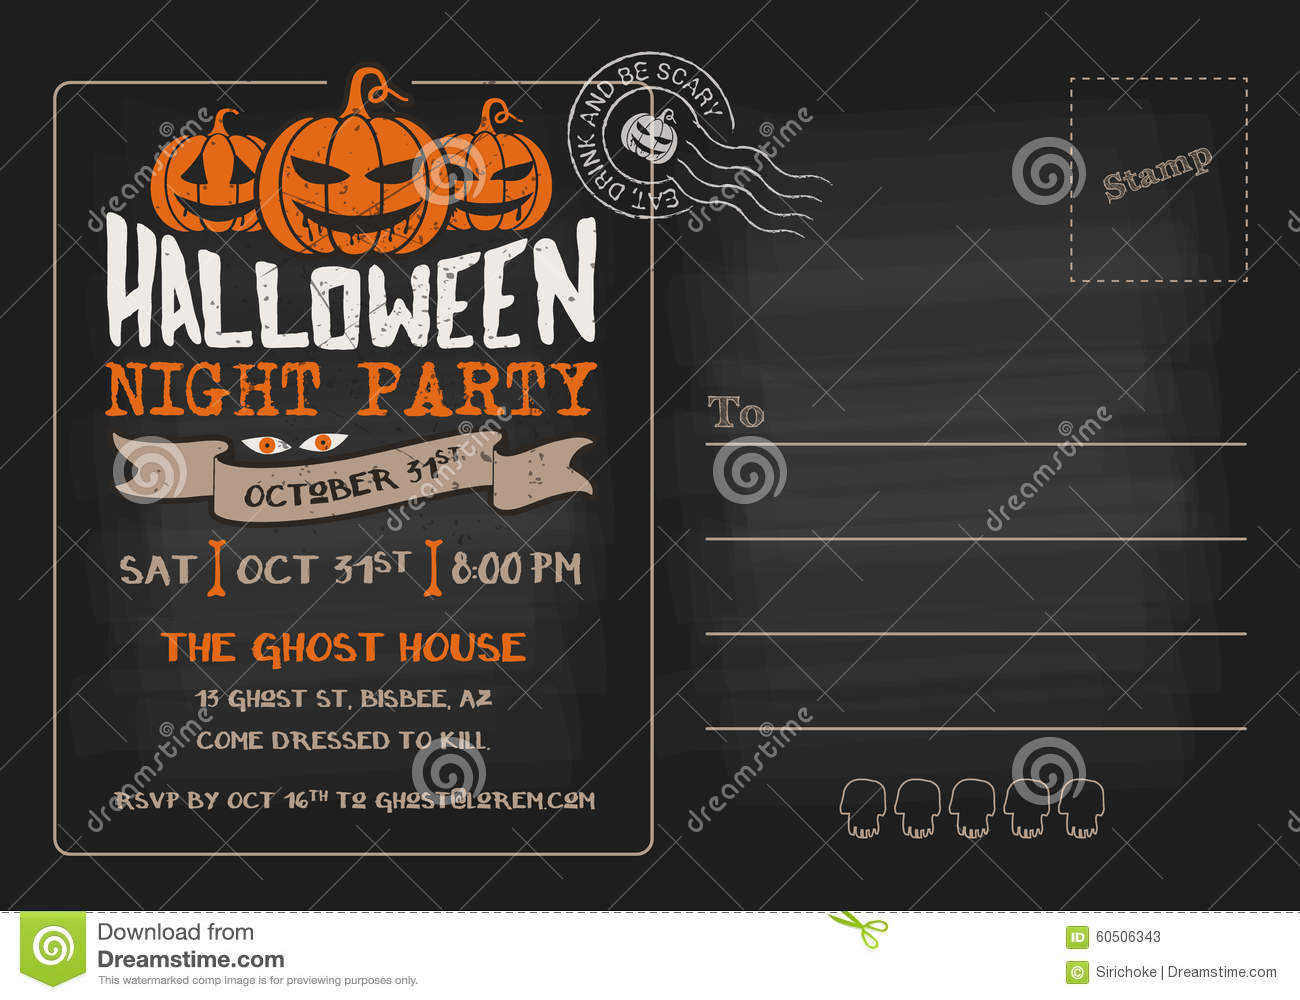 Halloween Party And Costume Contest Postcard Invitation Stock Vector within measurements 1300 X 1000